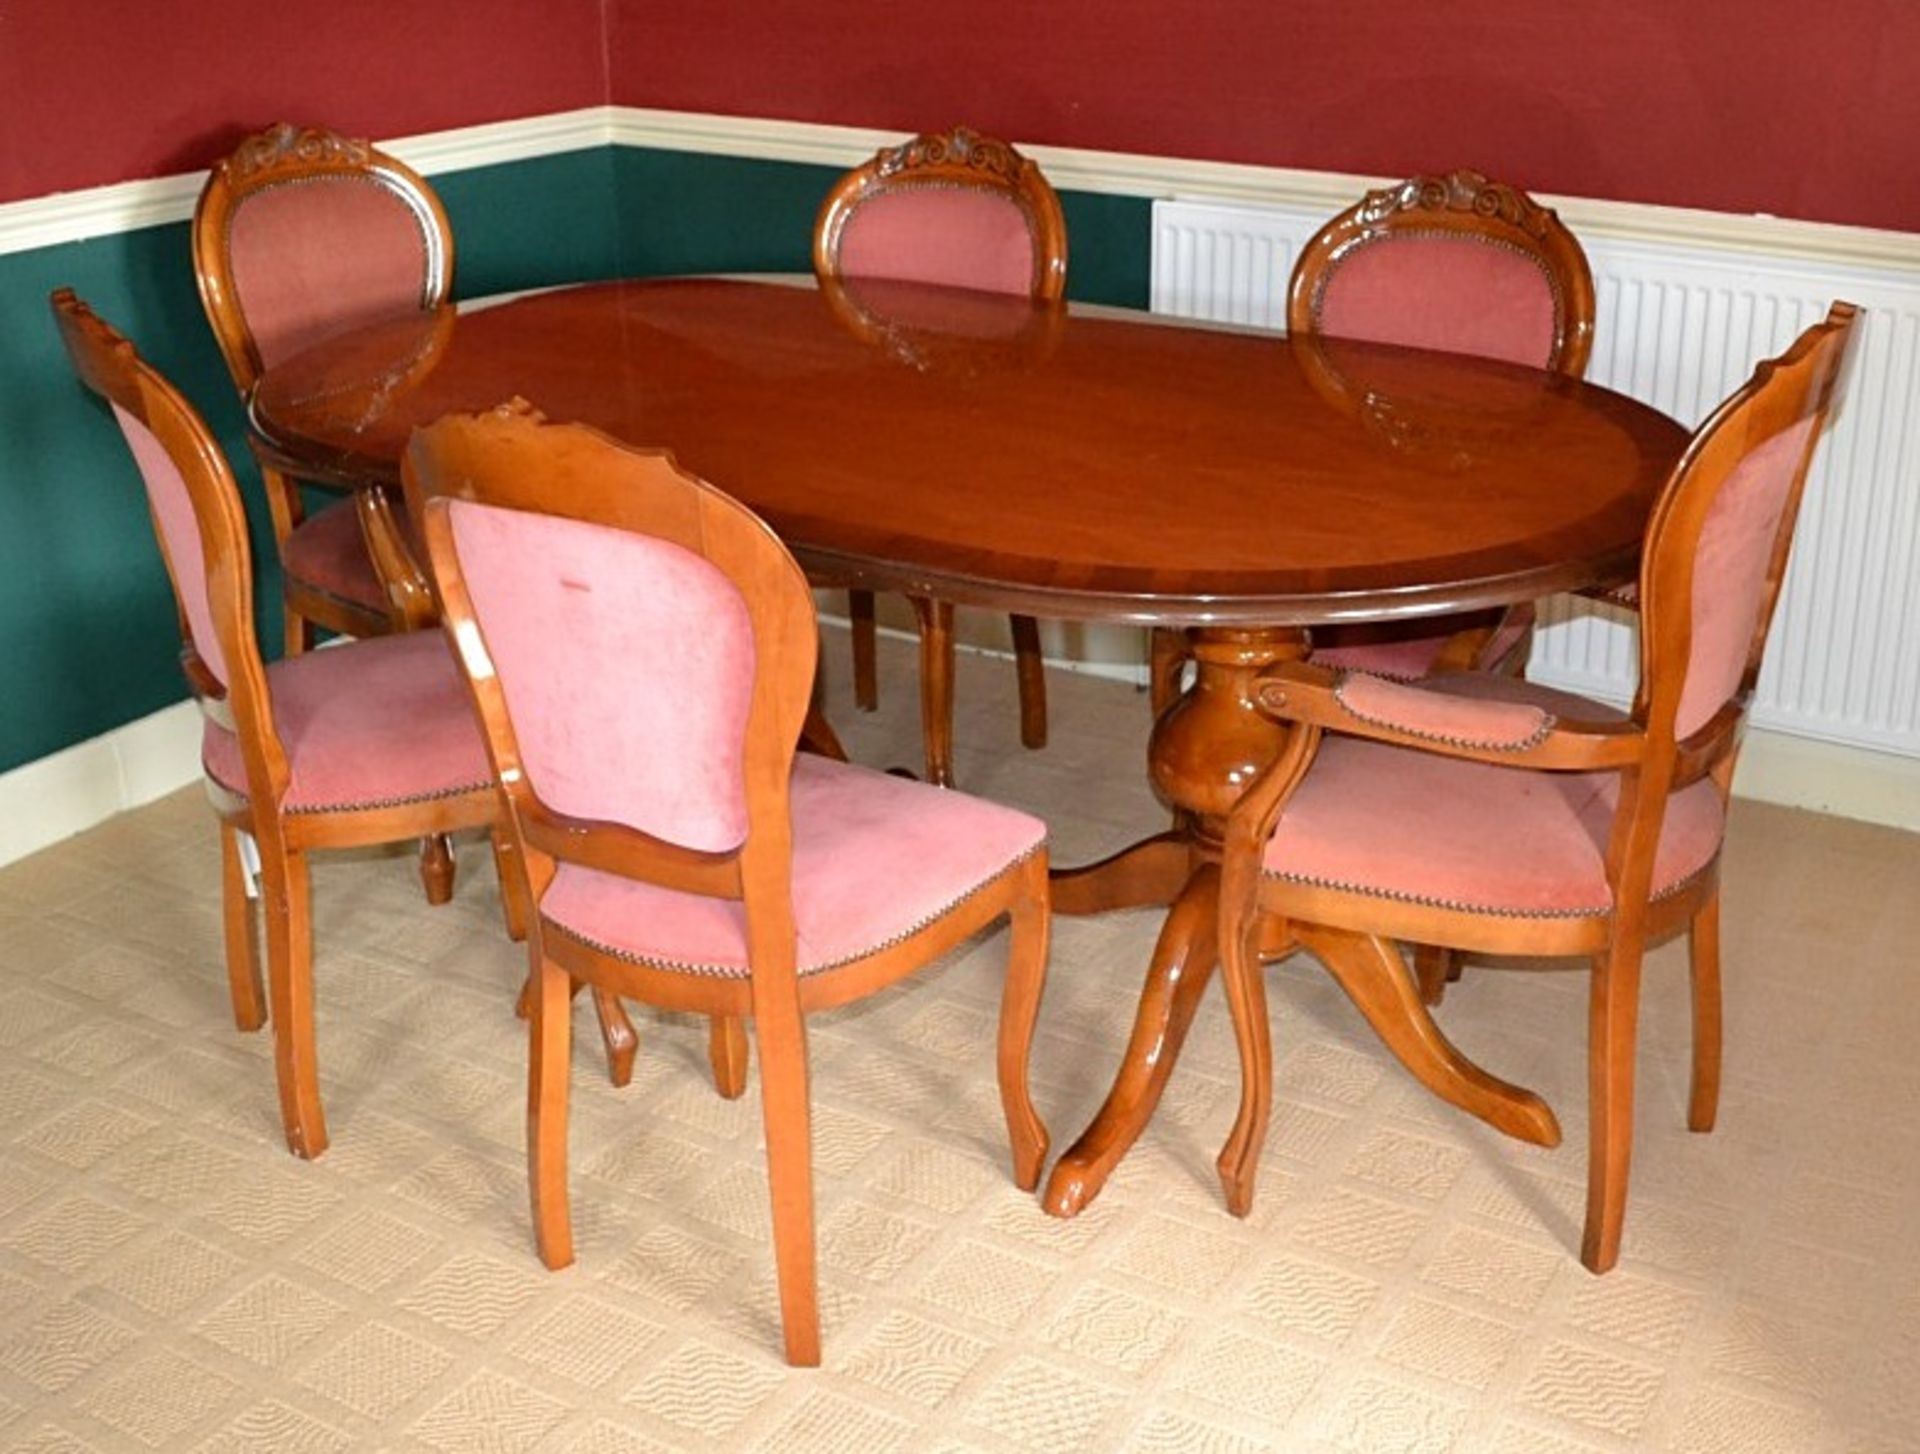 *Just Added* 1 x Large Solid Wood Dining Table With Chairs - From A Grade II Listed Hall In Very - Image 2 of 8